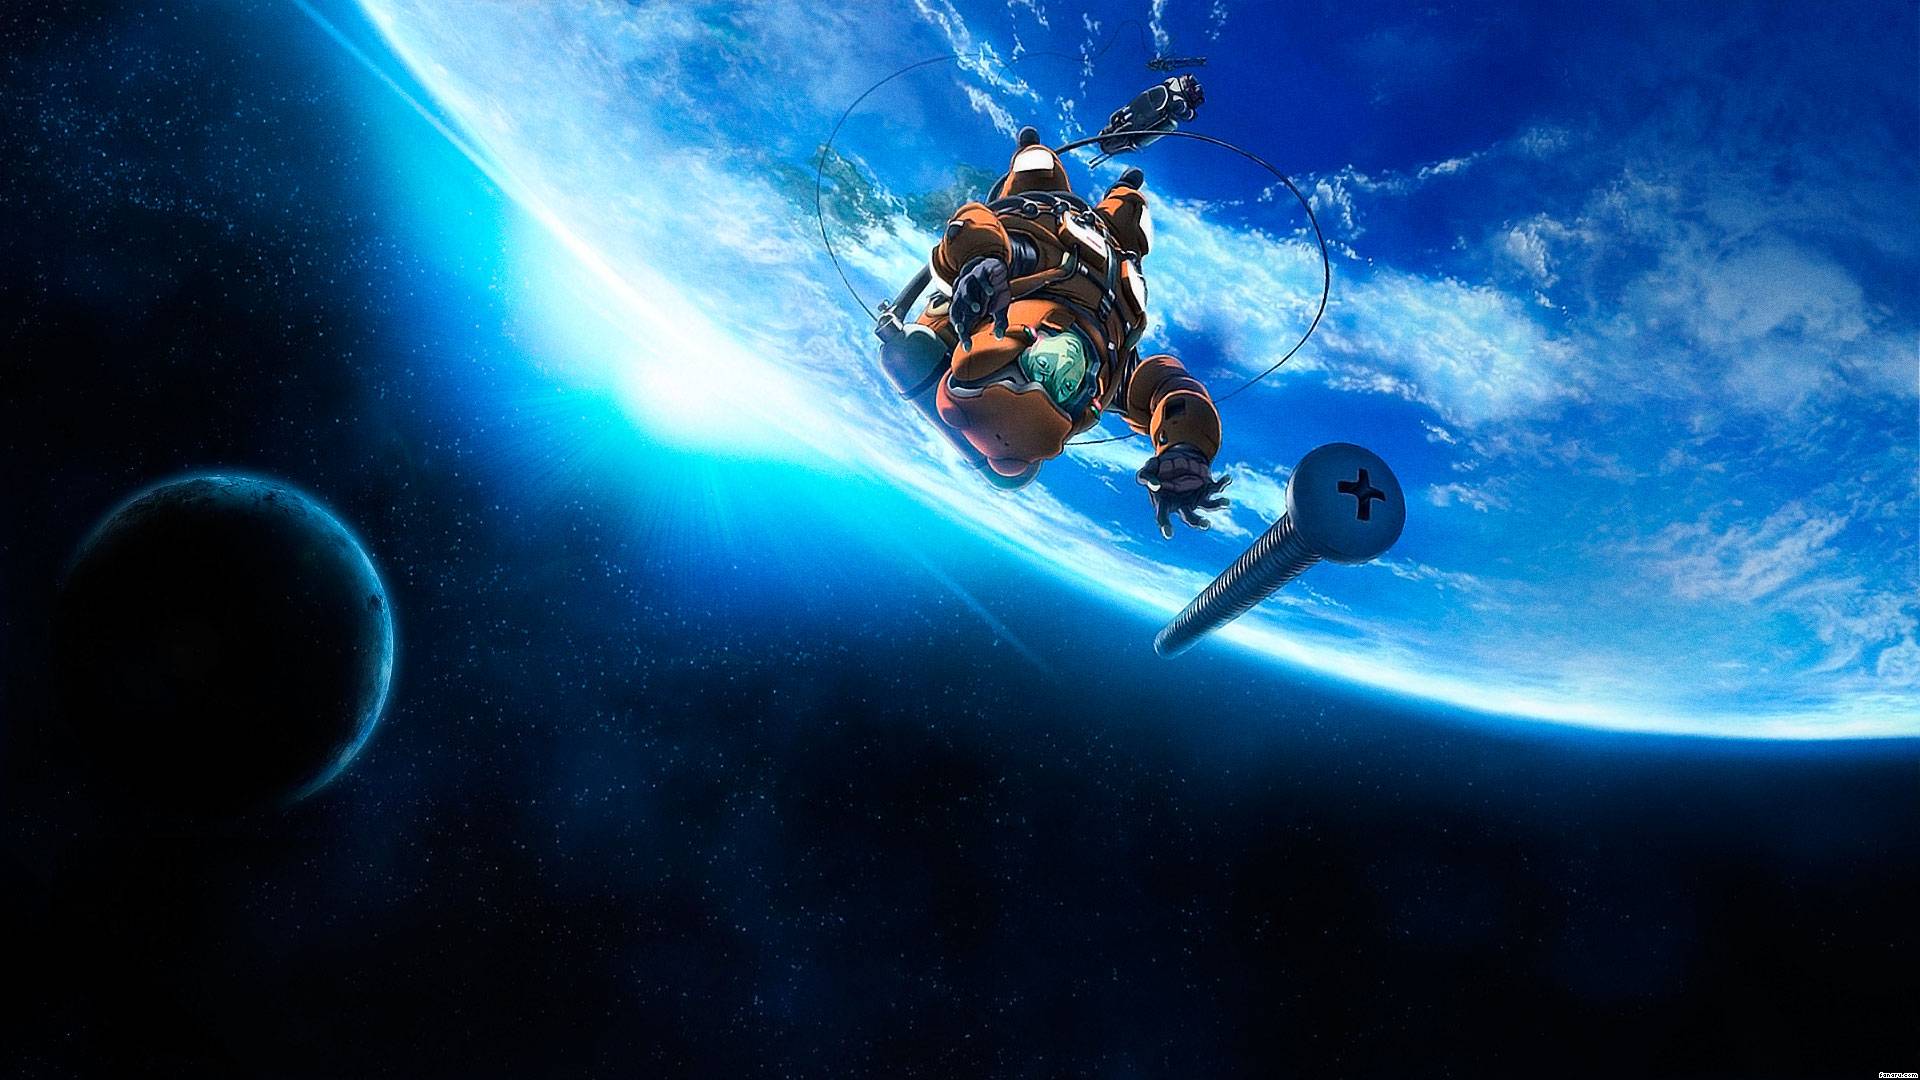 Anime Space Wallpaper Free Anime Space Background